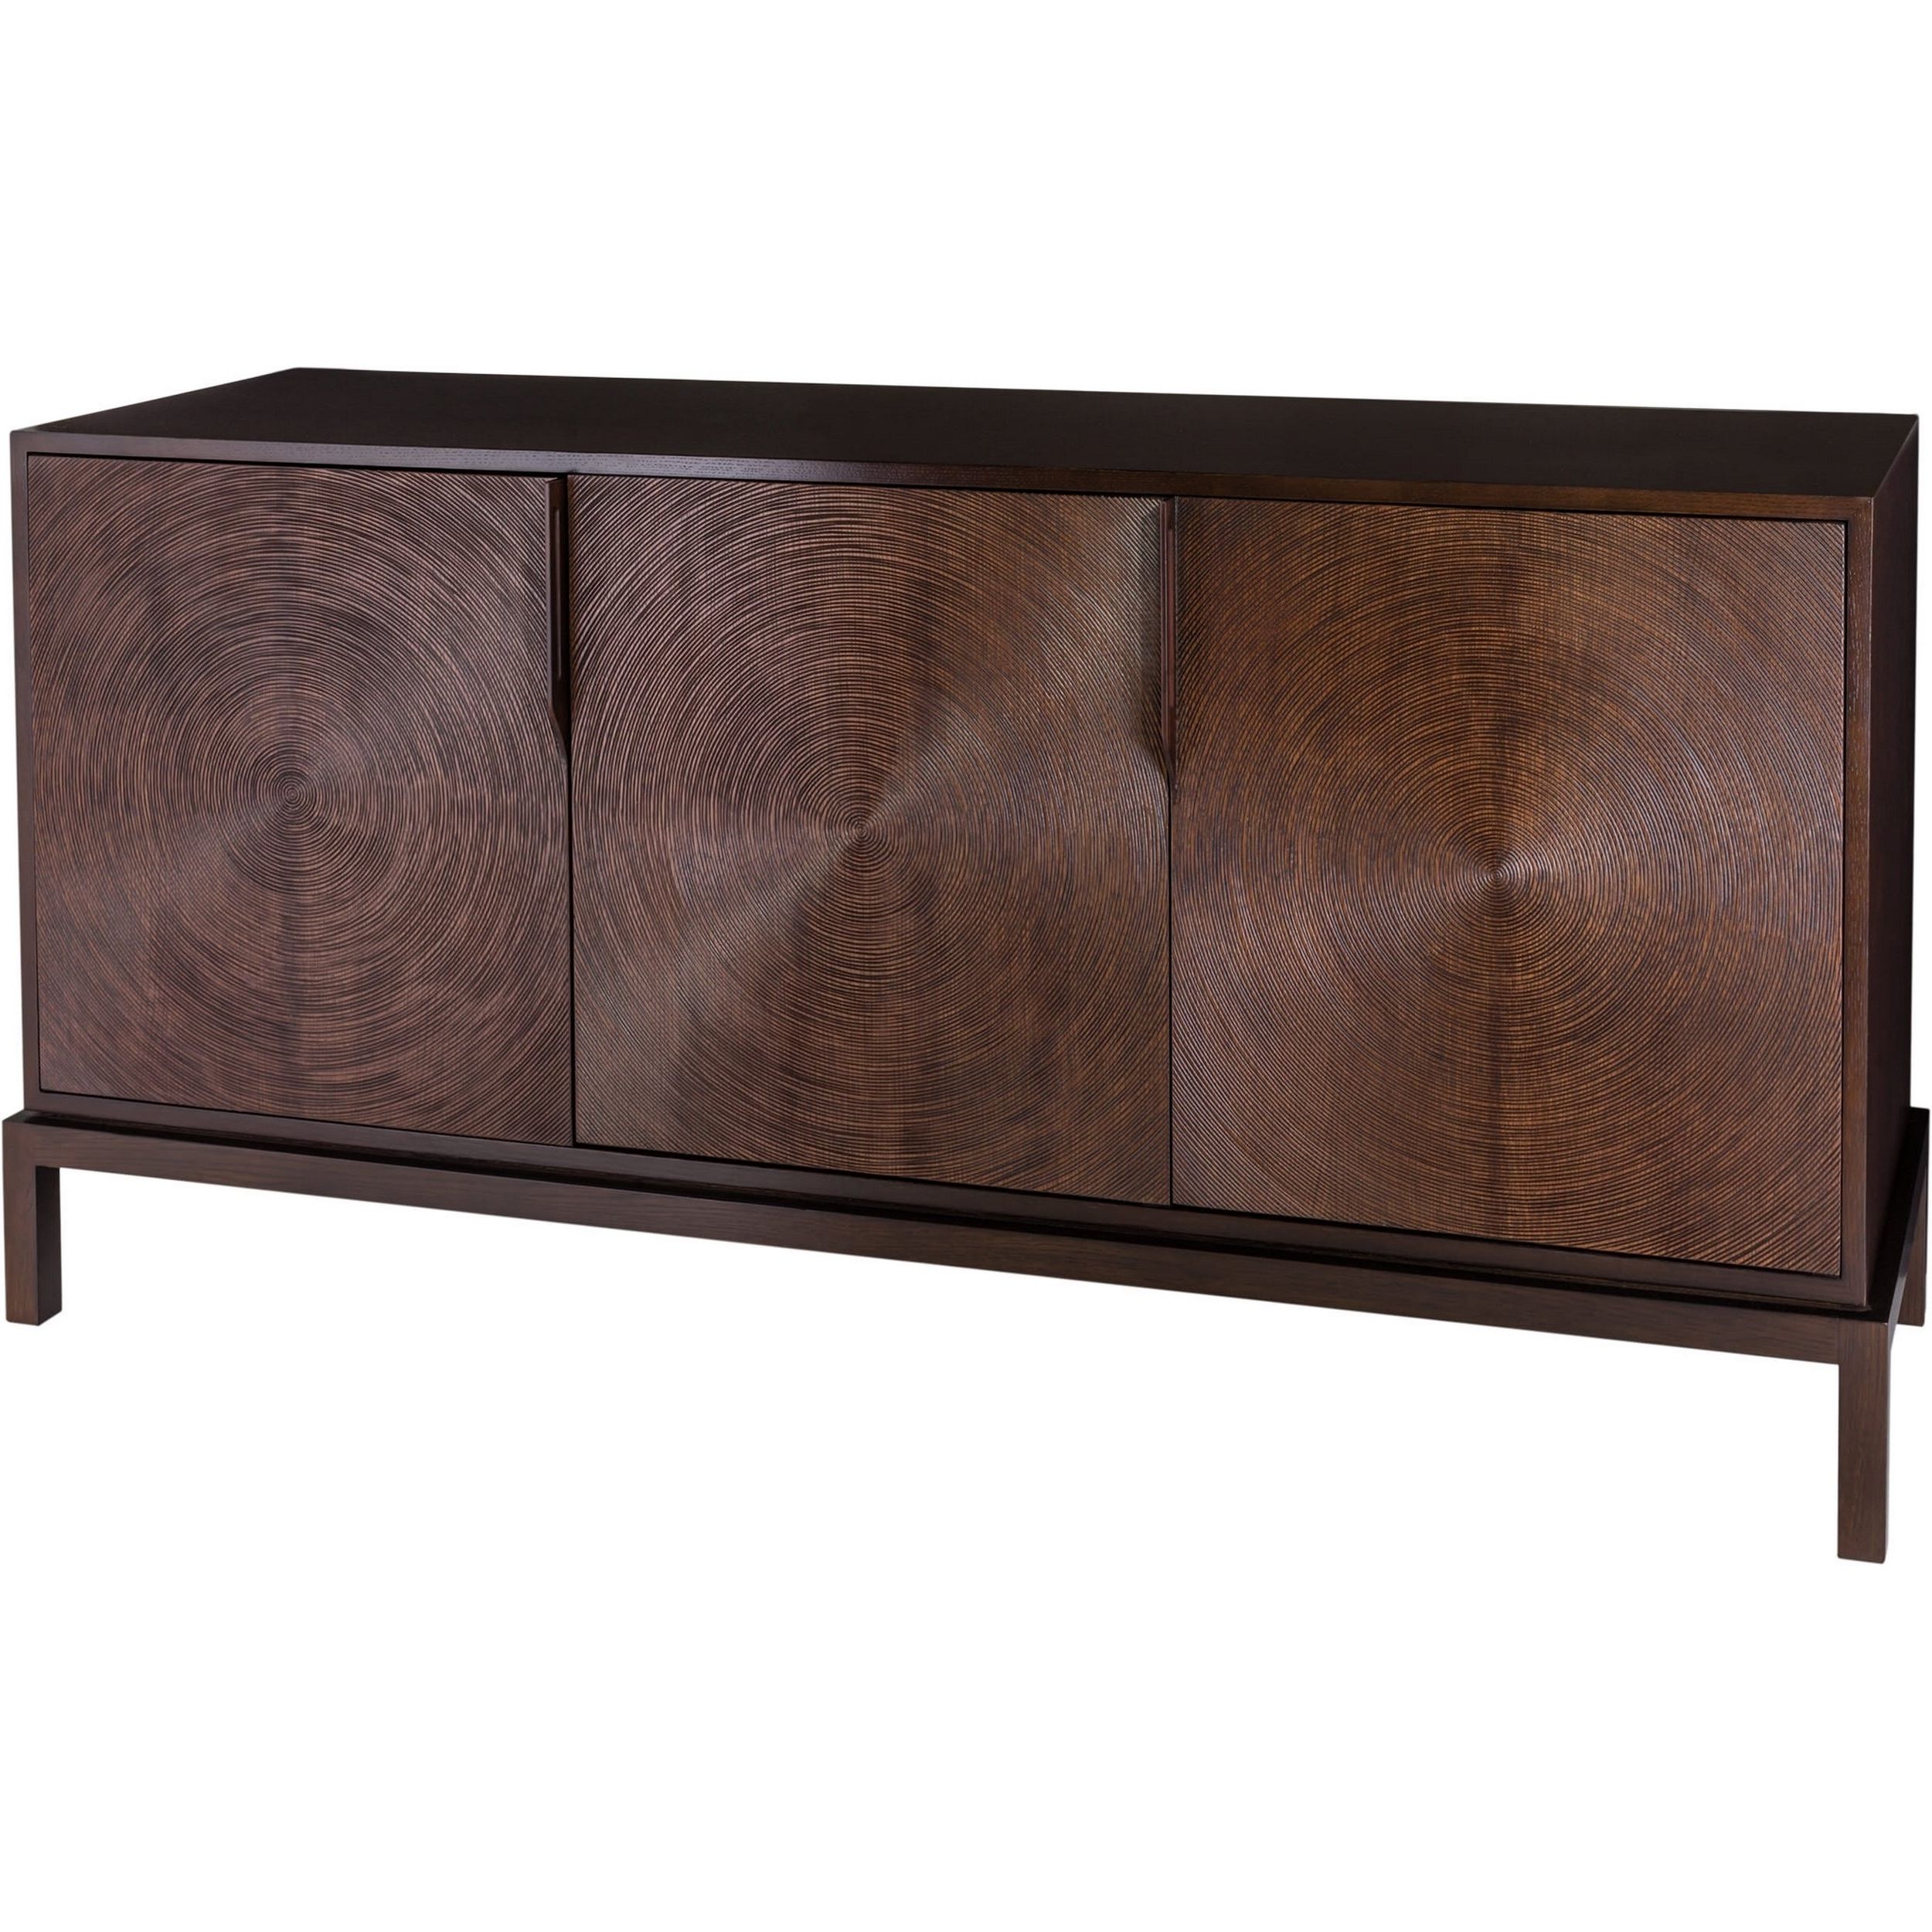 Safavieh Couture High Line Collection Elsie Mahogany Espresso Storage Buffet In Espresso Wood Multi Use Buffets (View 9 of 20)